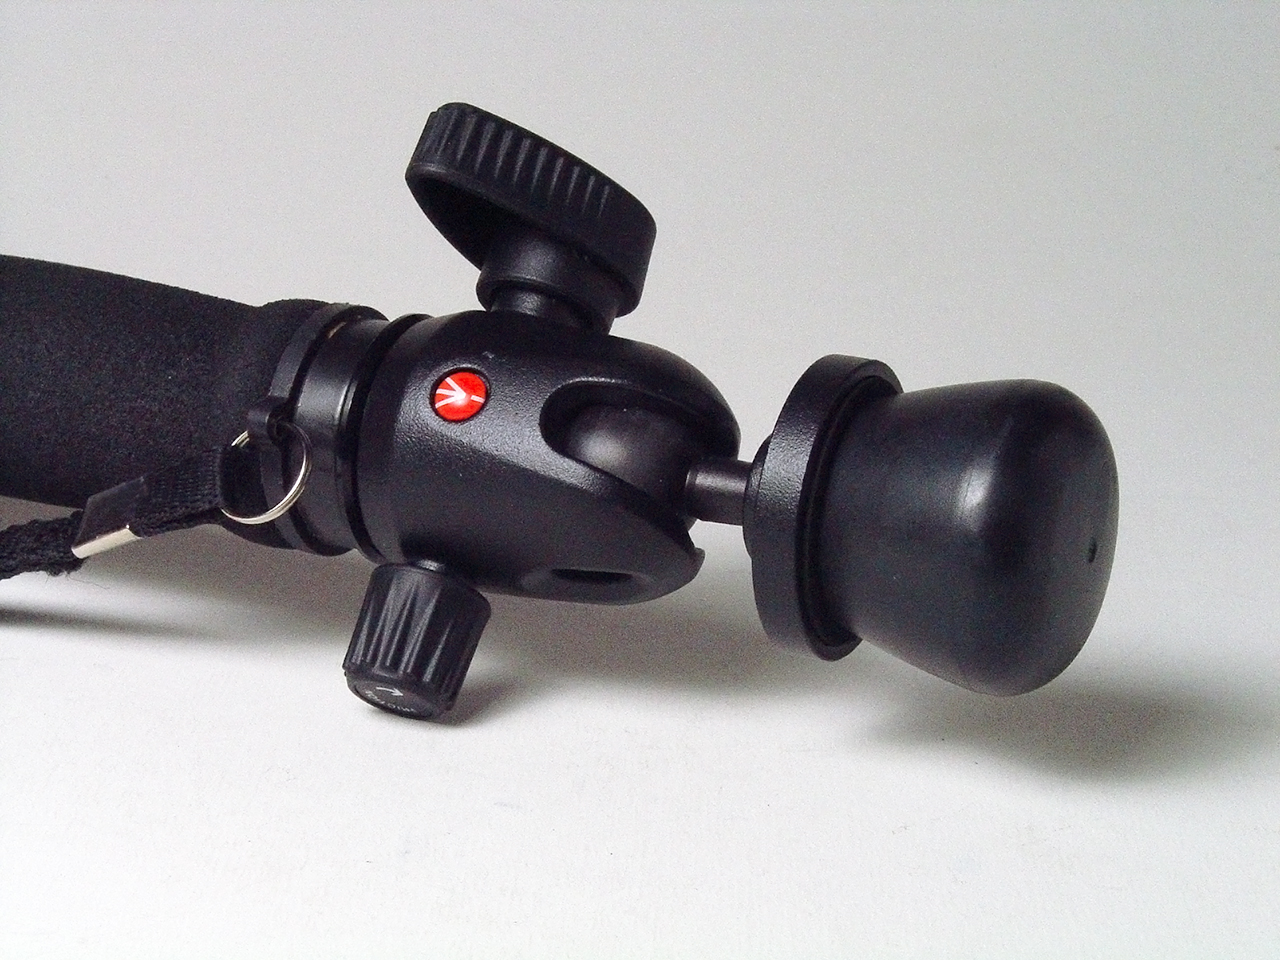 Click to Enlarge - Monopod with Manfrotto 494 Mini Ball Head